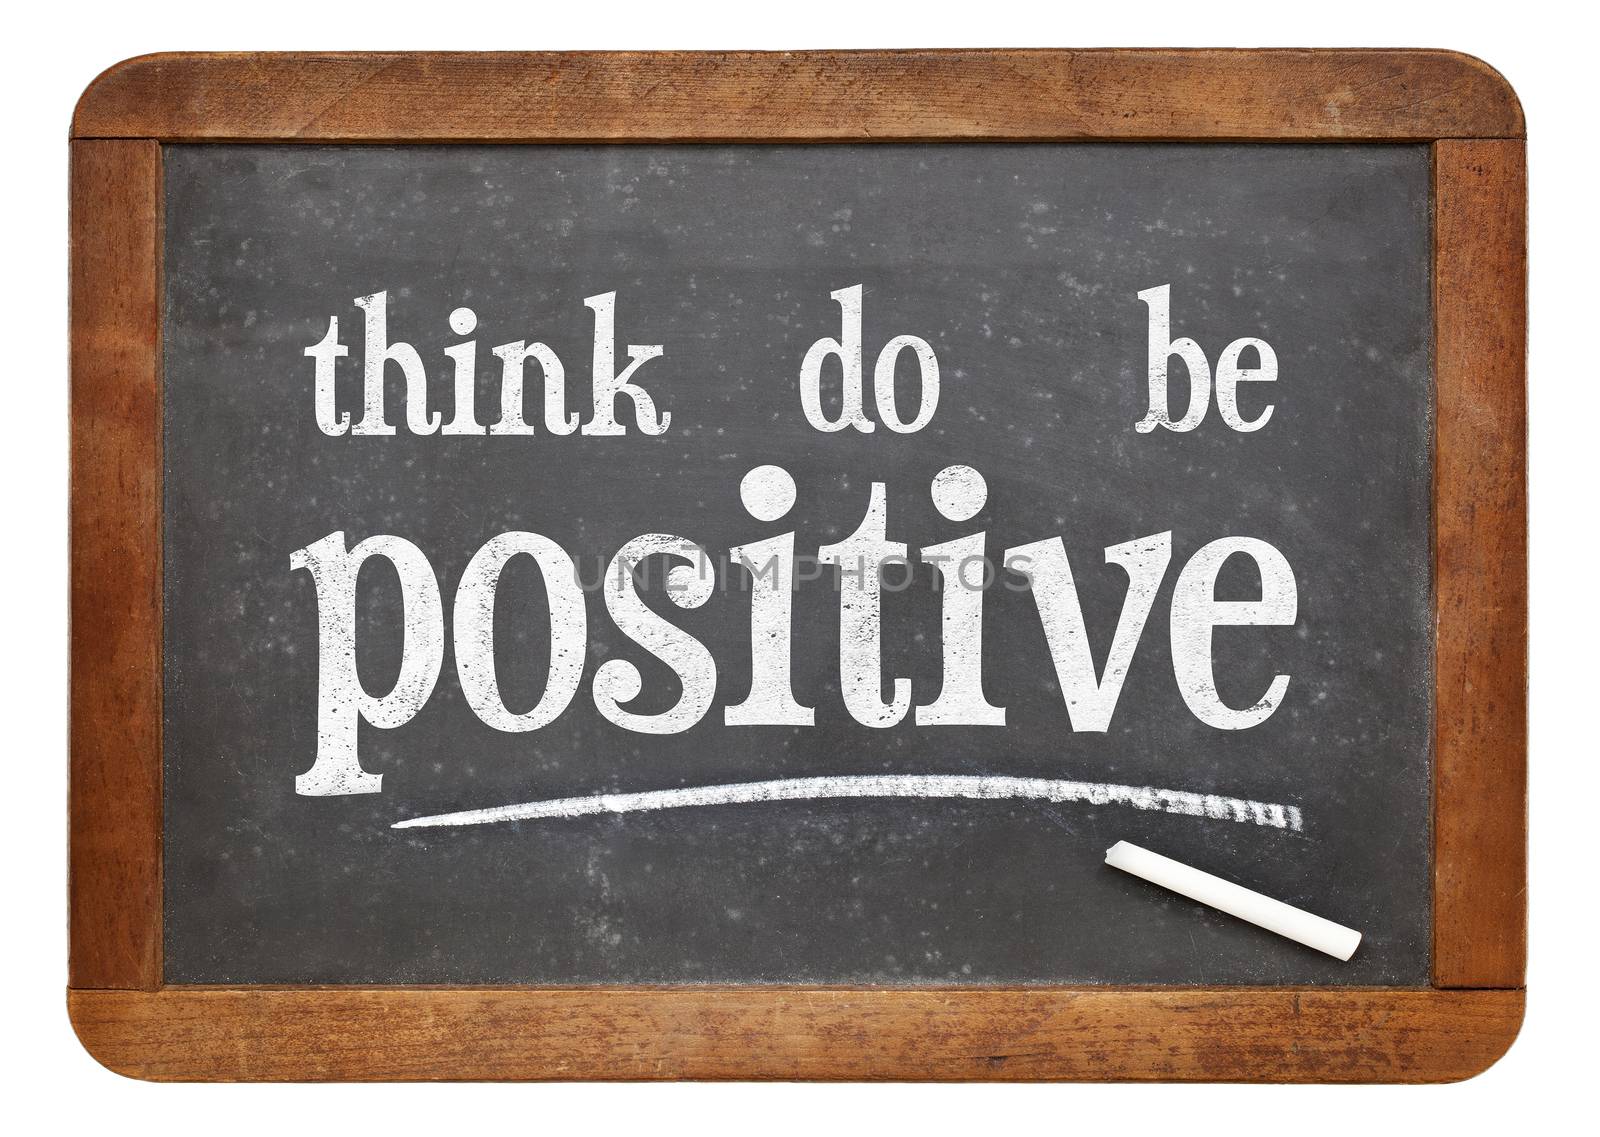 think, do, be positive motivational concept by PixelsAway